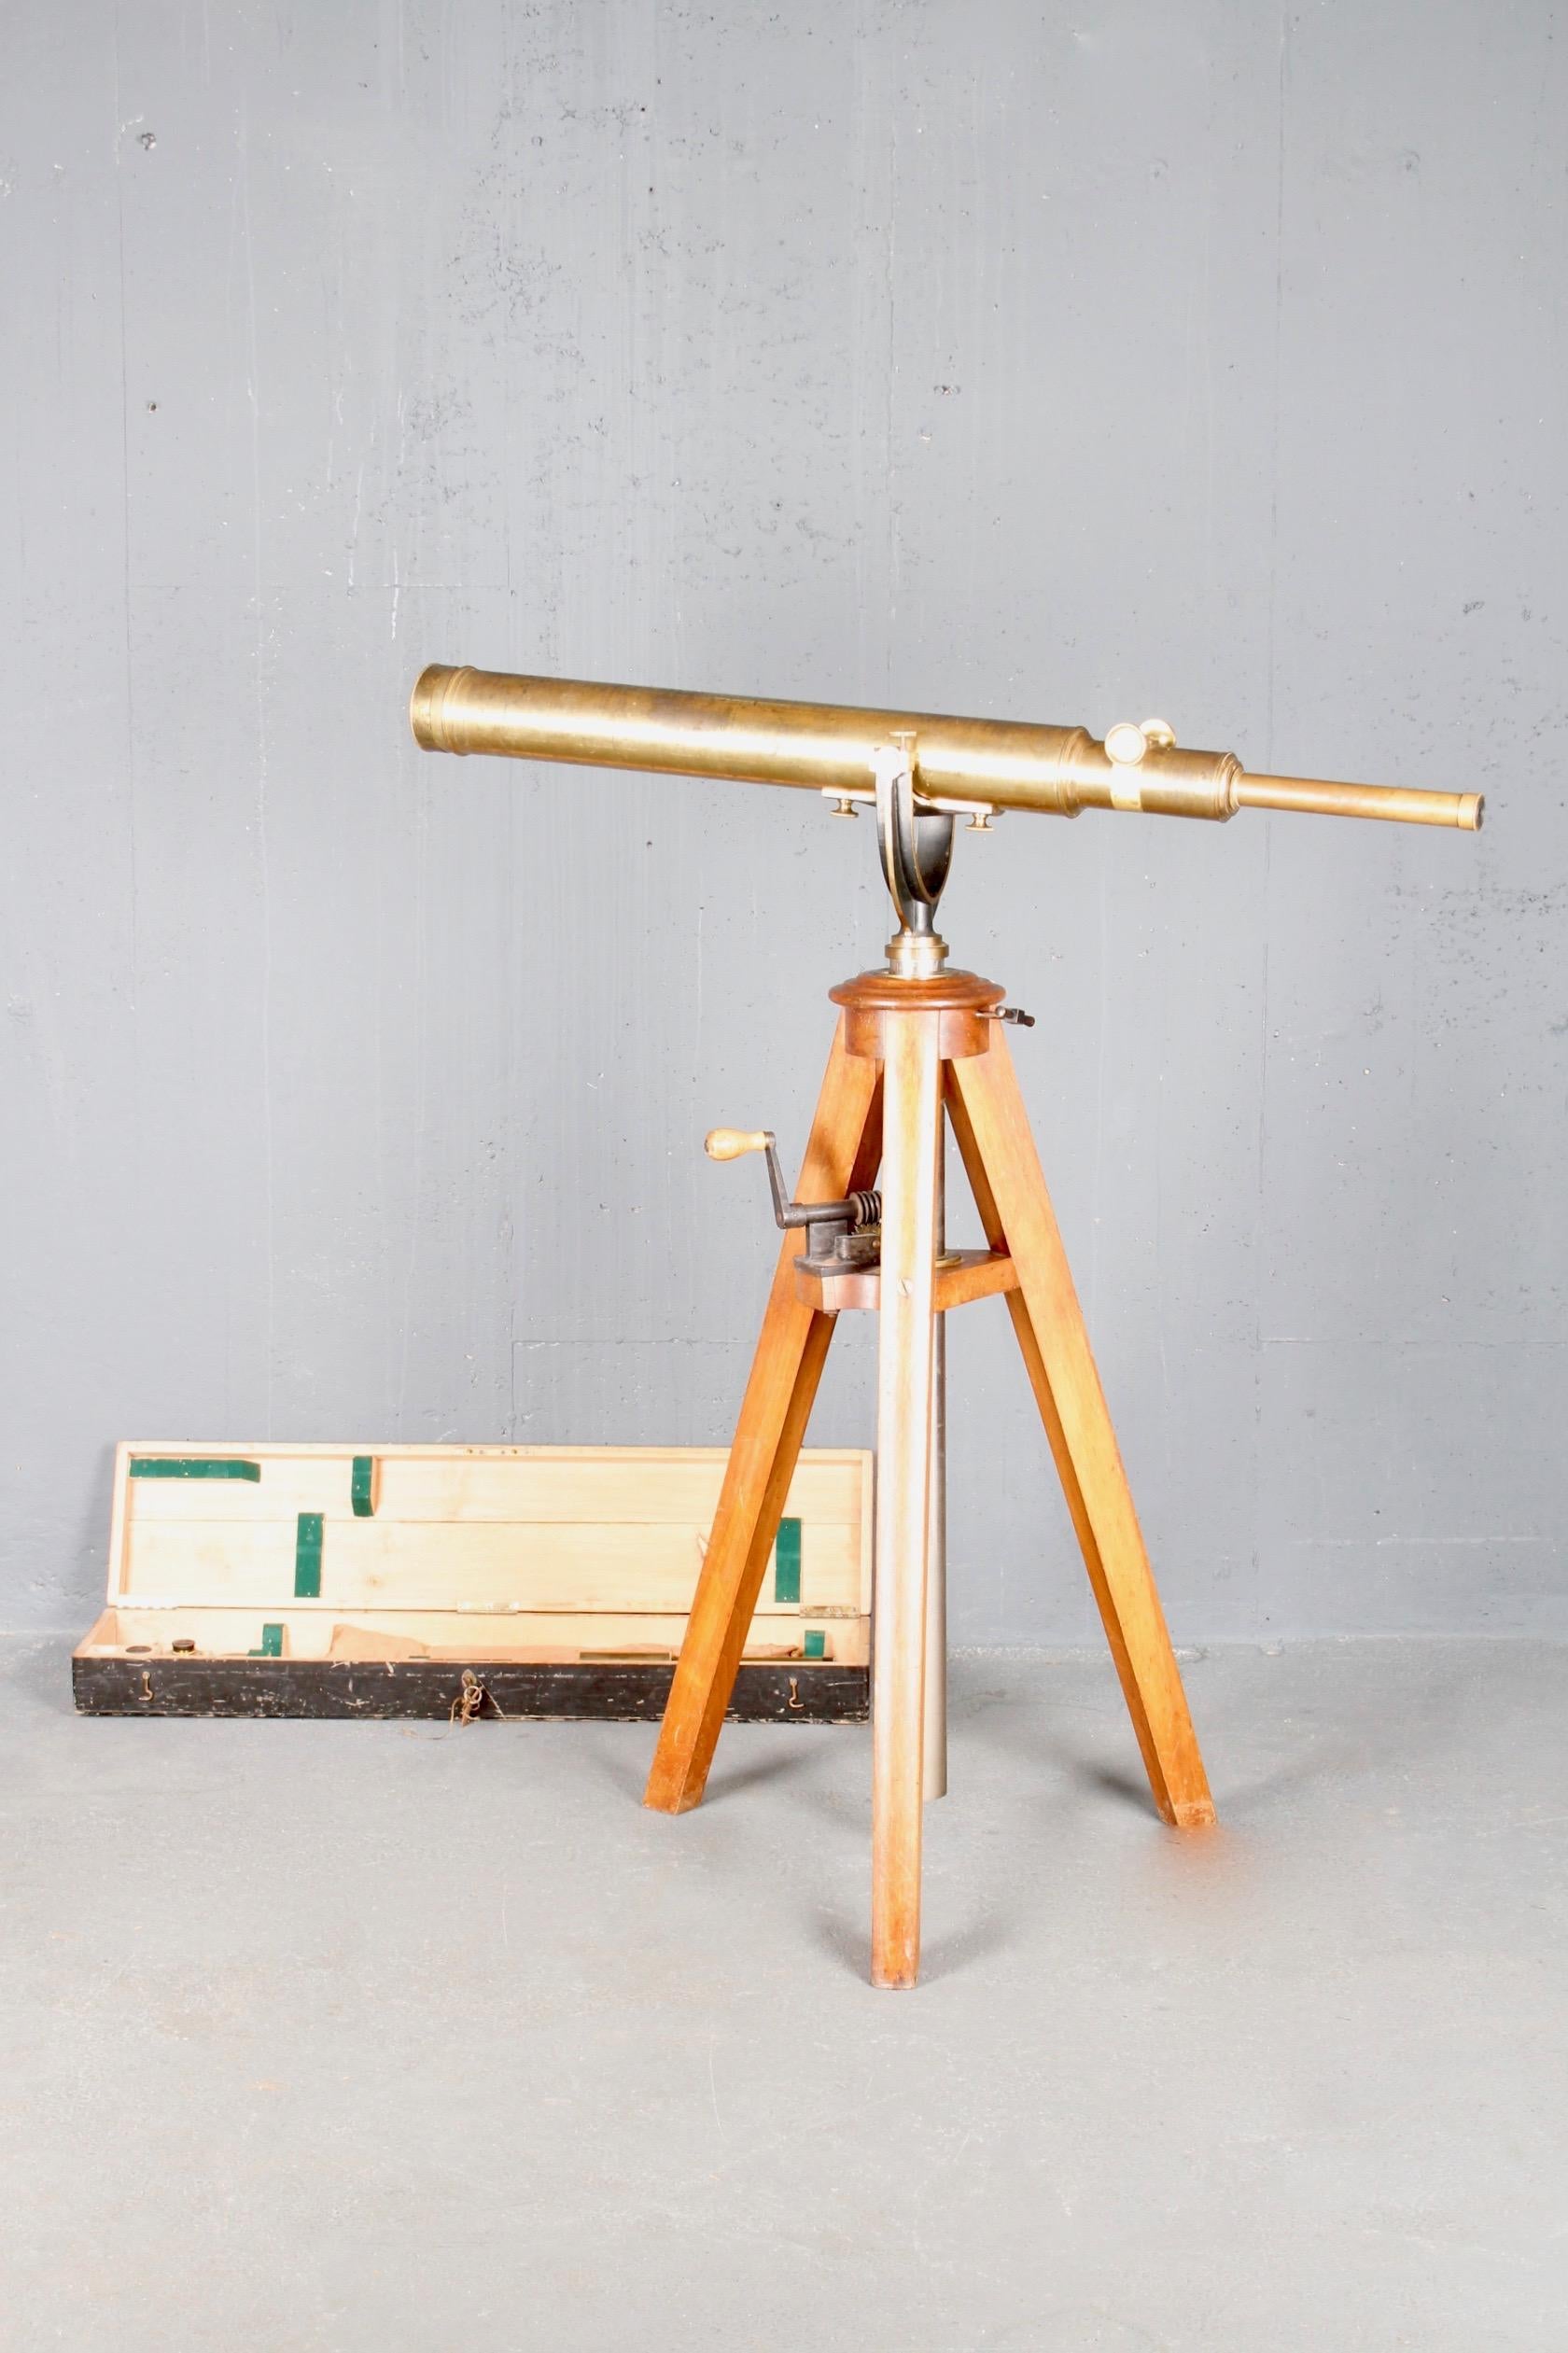 Adjustable (with crank handle) Brass wood telescope + wood storage and 2 additional lens
Maximum height : 170 cm.